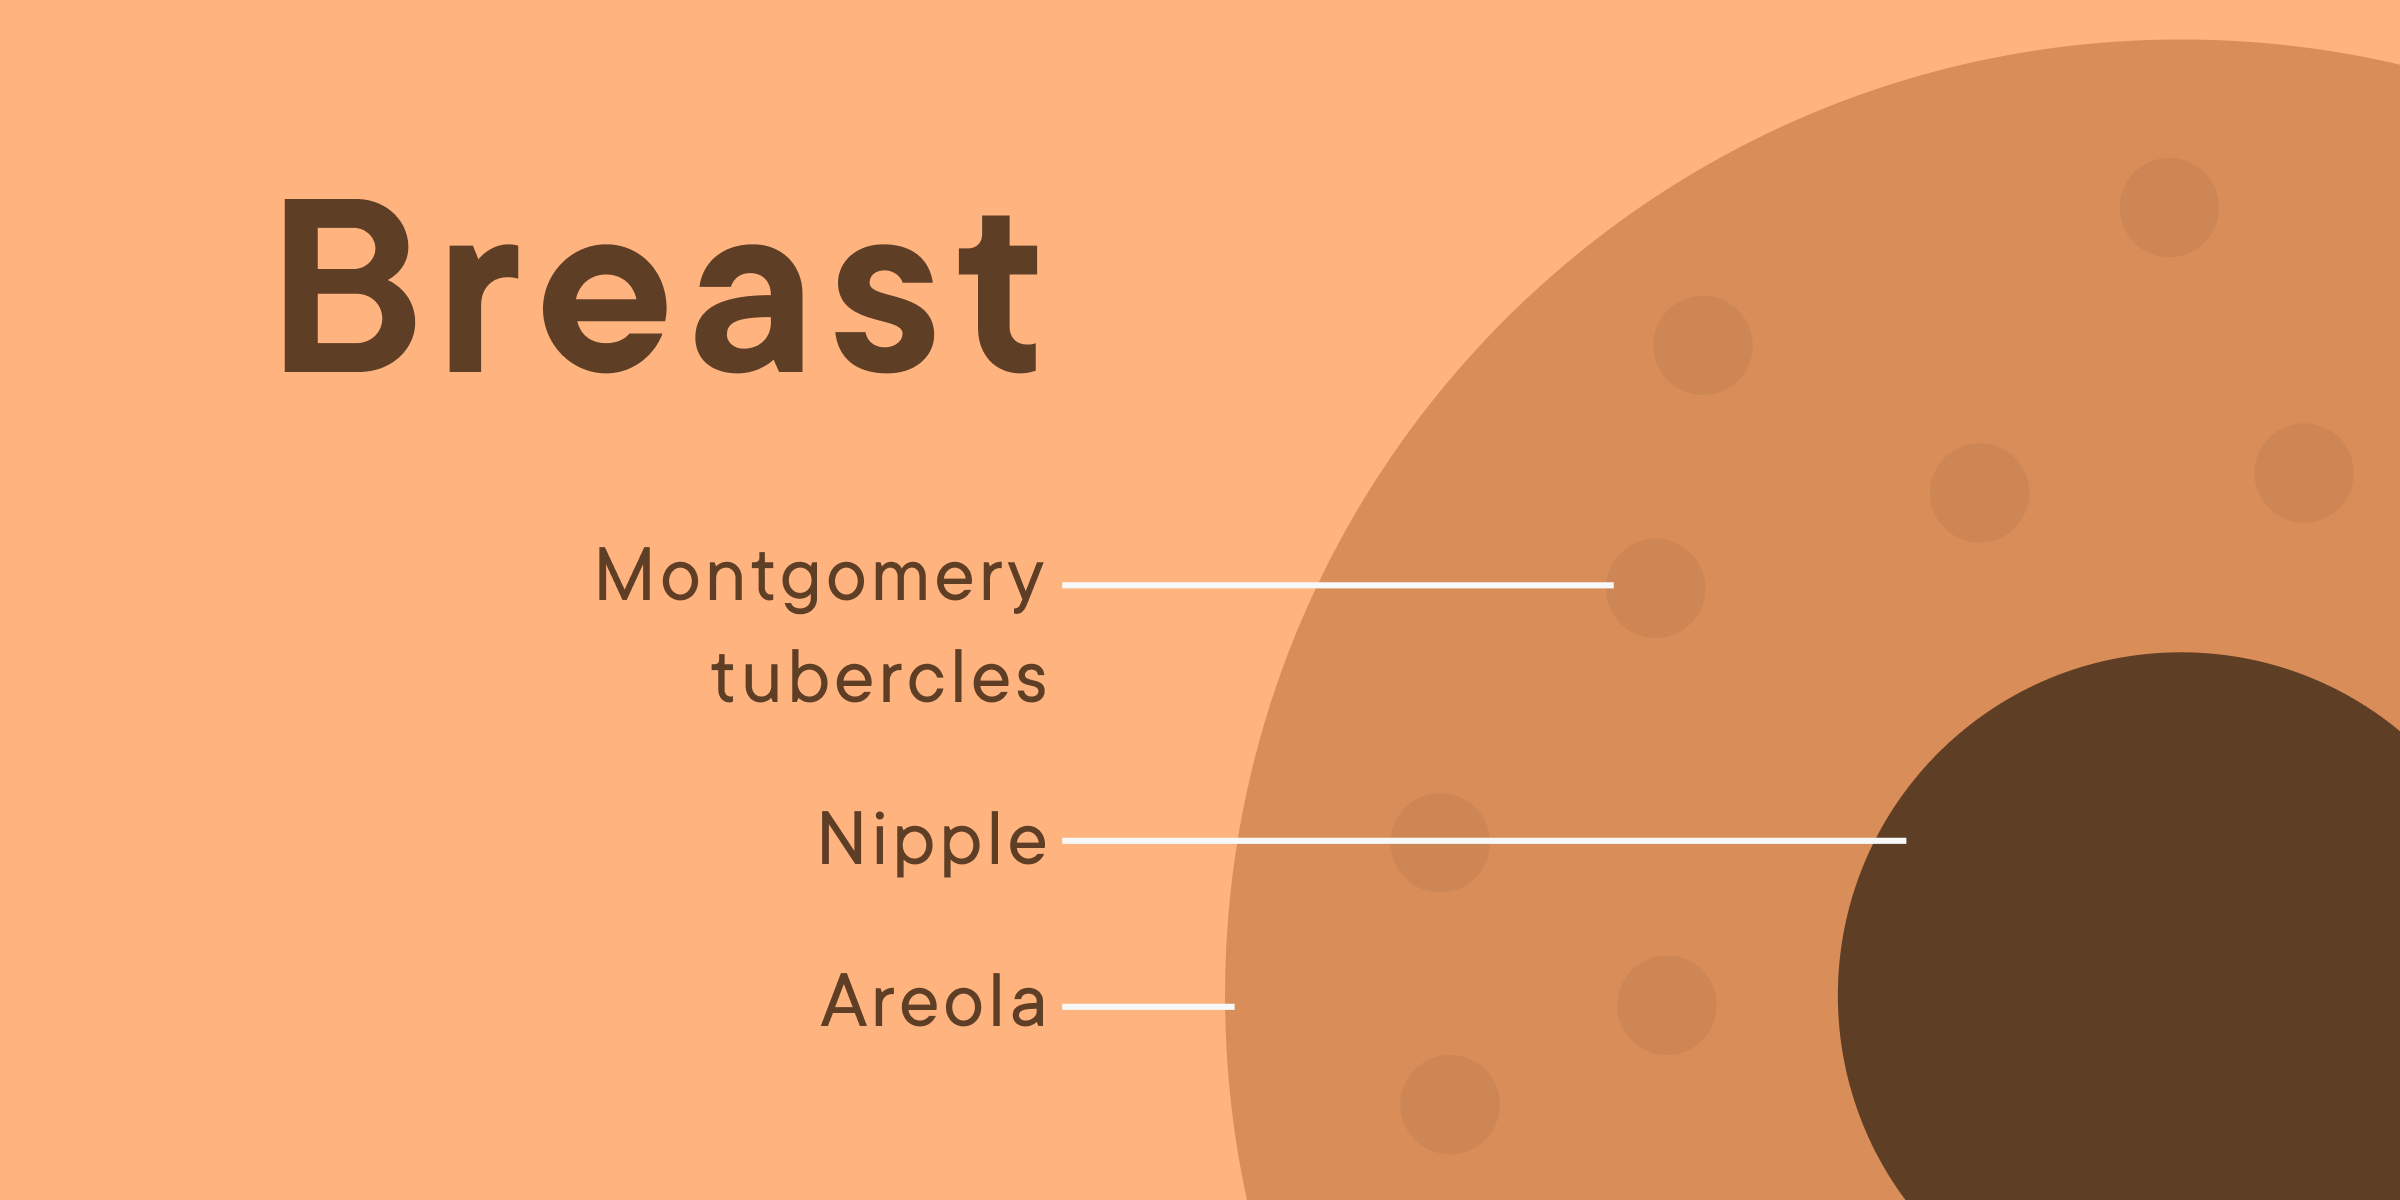 Diagram showing the breast, areola, nipple and Montgomery tubercles